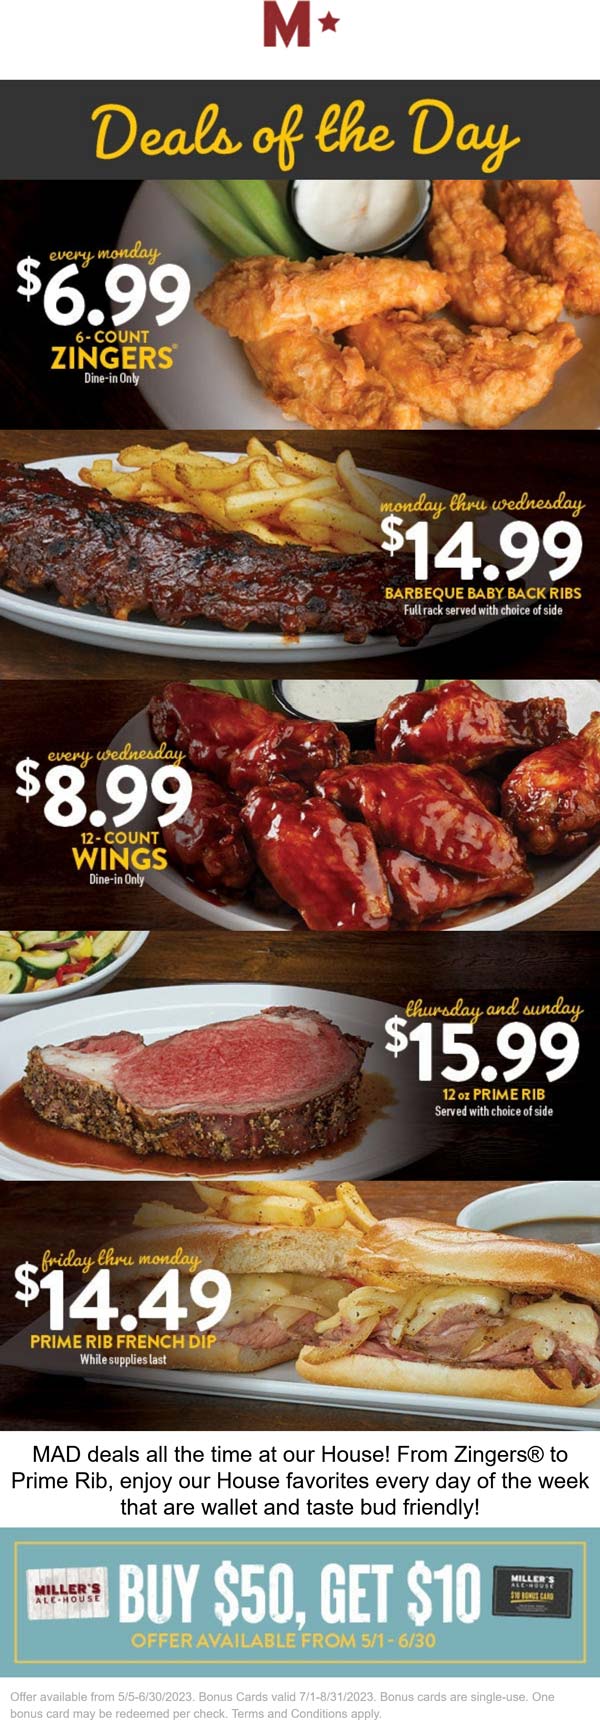 Millers Ale House restaurants Coupon  $7 chicken zingers & more daily at Millers Ale House #millersalehouse 